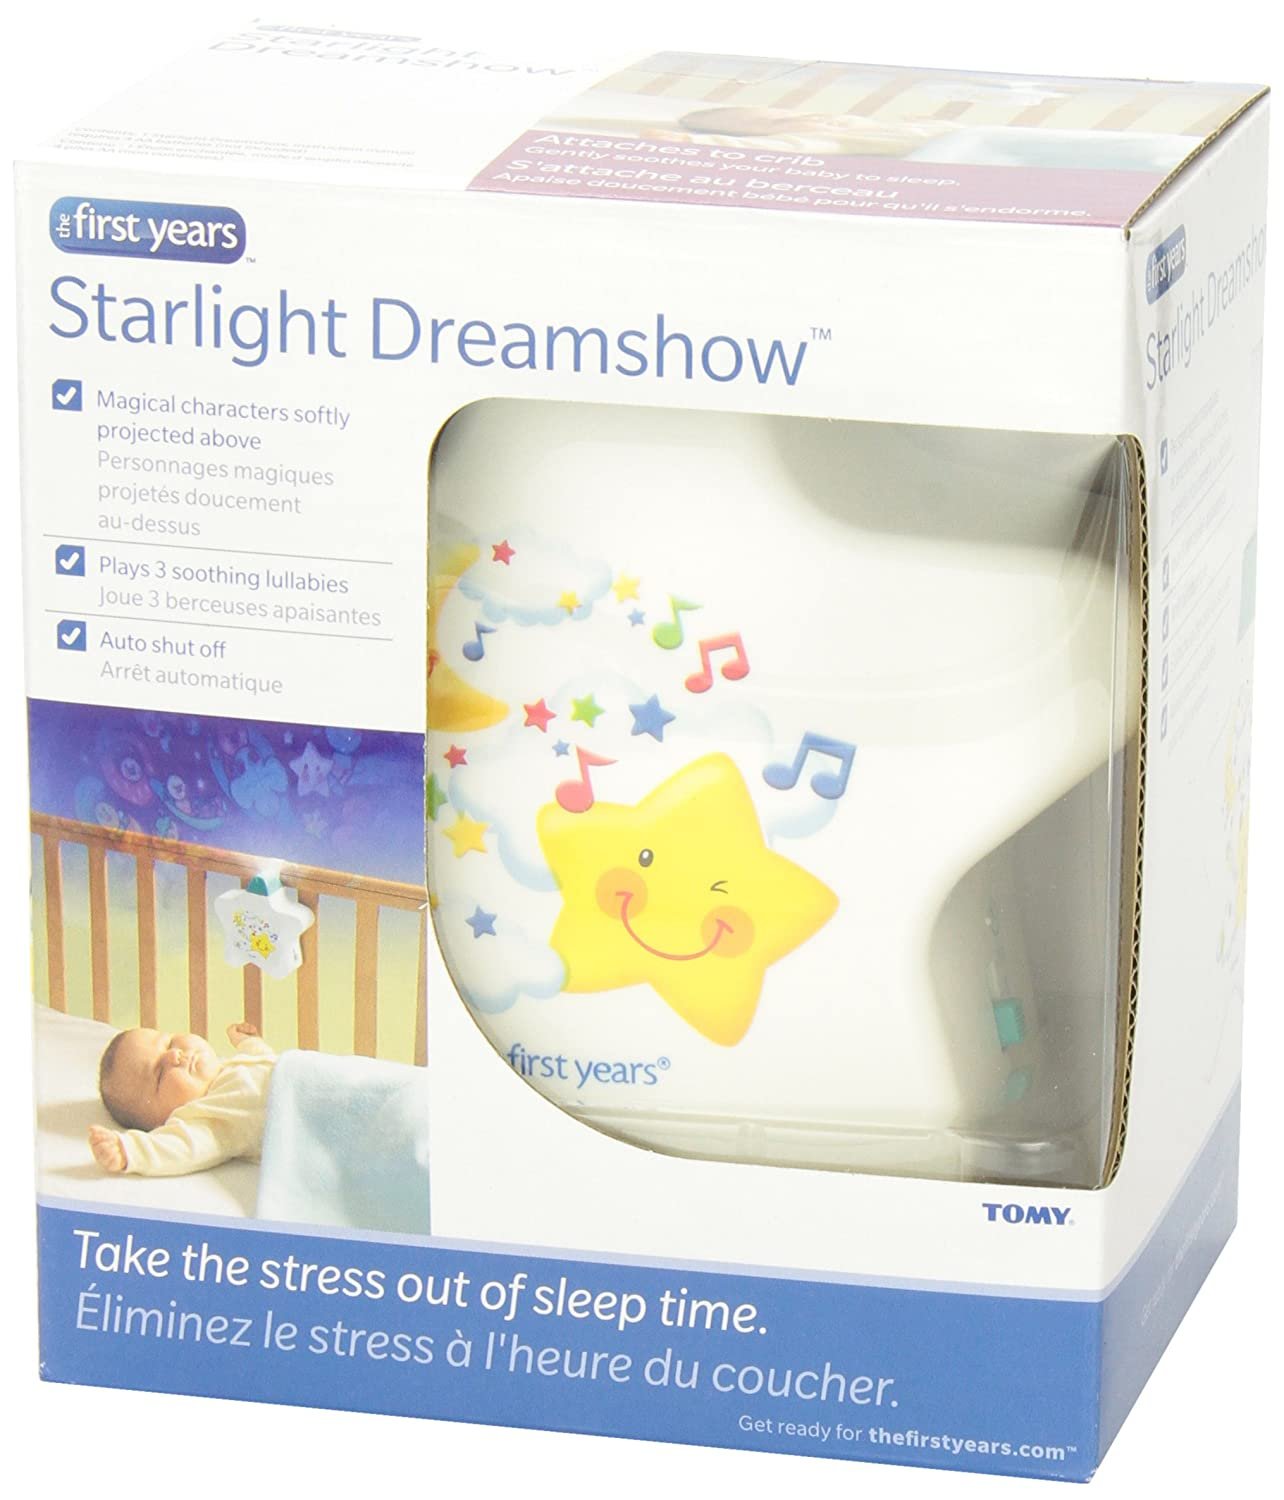 TOMY First Years Starlight Dreamshow Baby Cot Nightlight with Lullabies YELLOW 